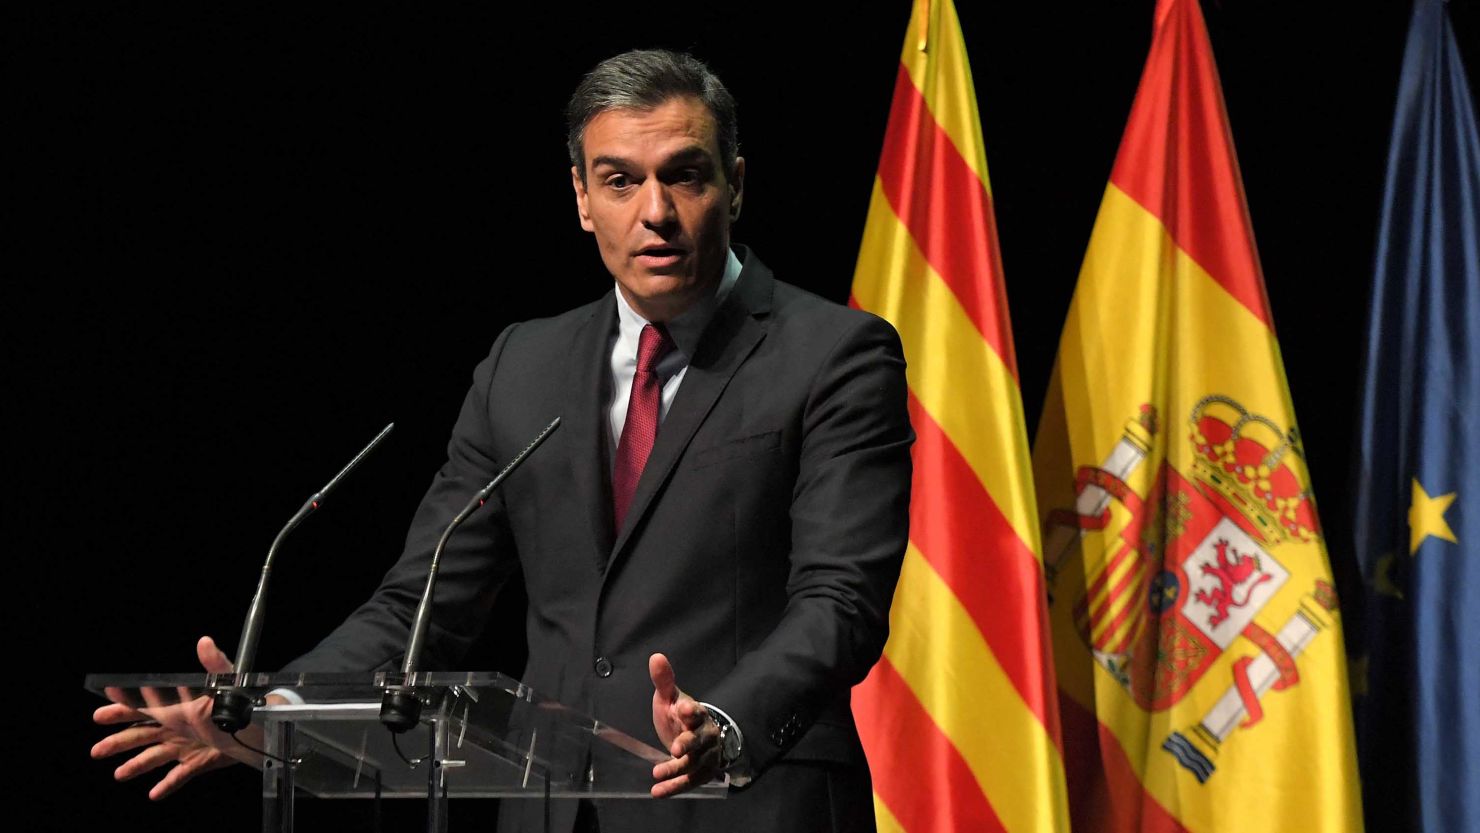 Prime Minister Pedro Sanchez described the pardons as being "best for Catalonia and for Spain."